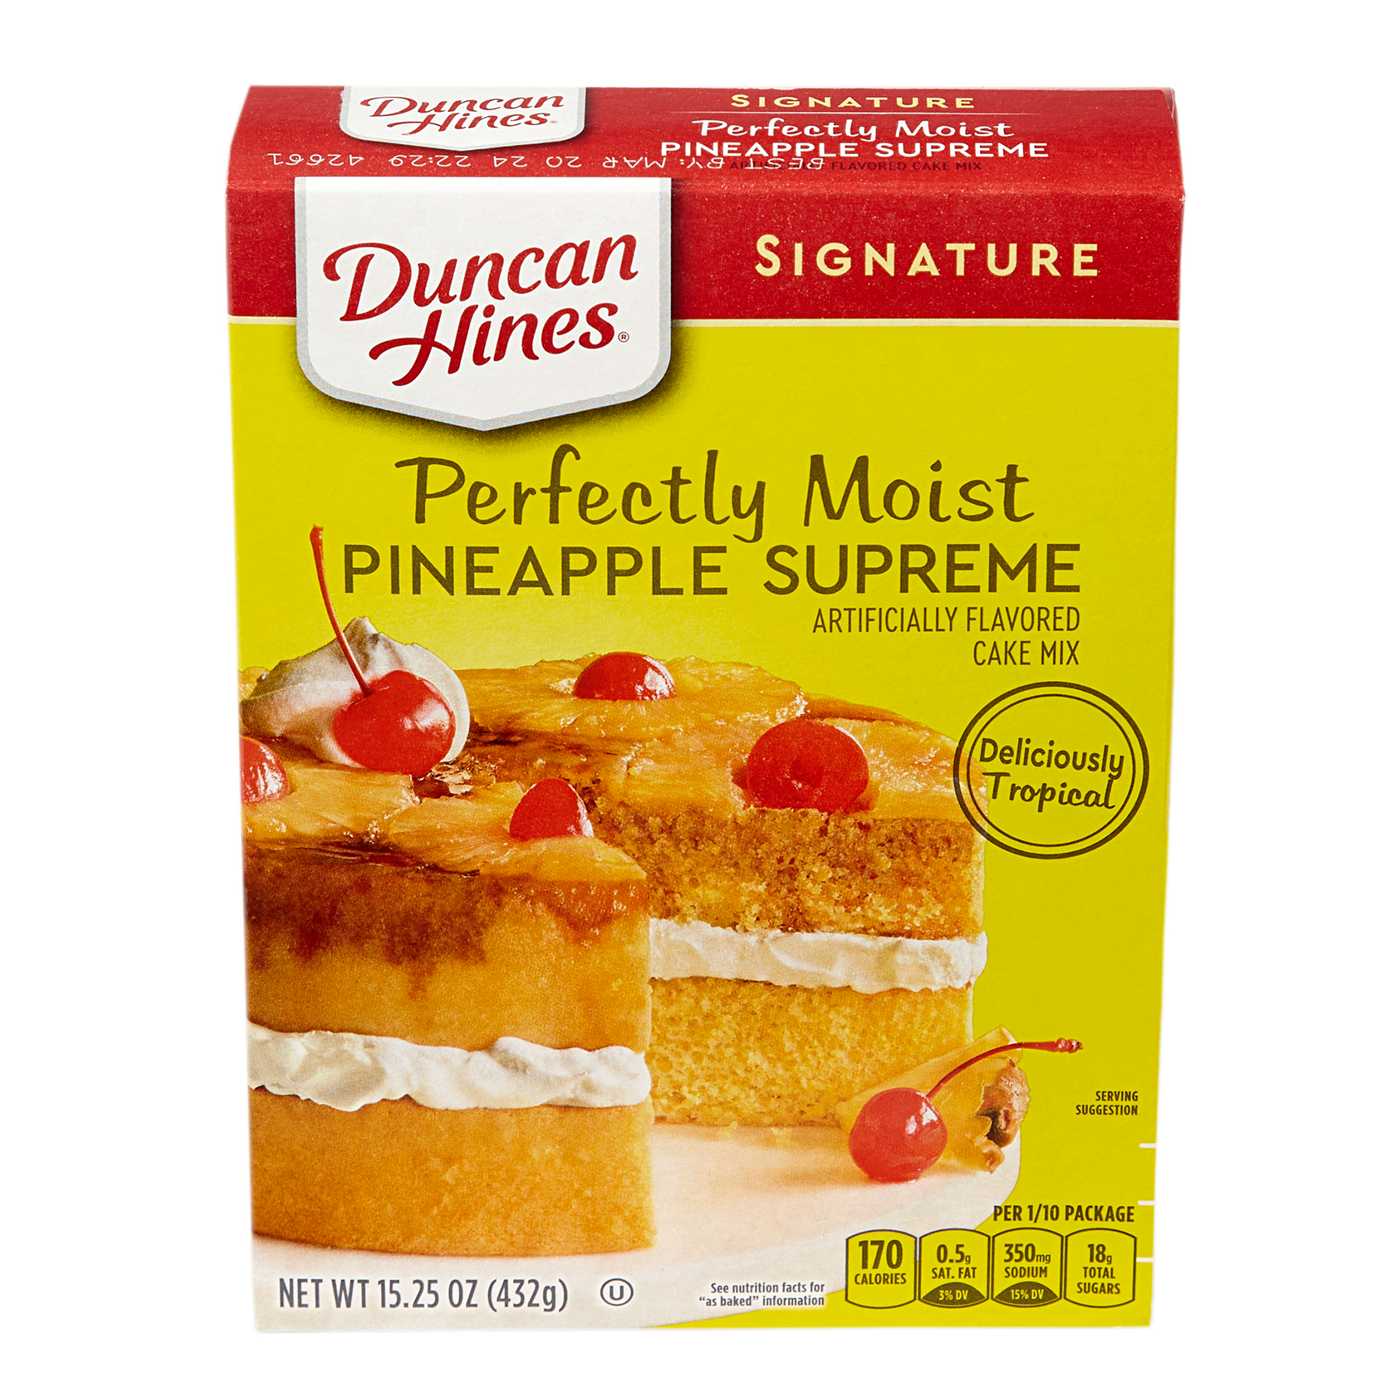 Duncan Hines Signature Perfectly Moist Pineapple Supreme Cake Mix; image 1 of 7